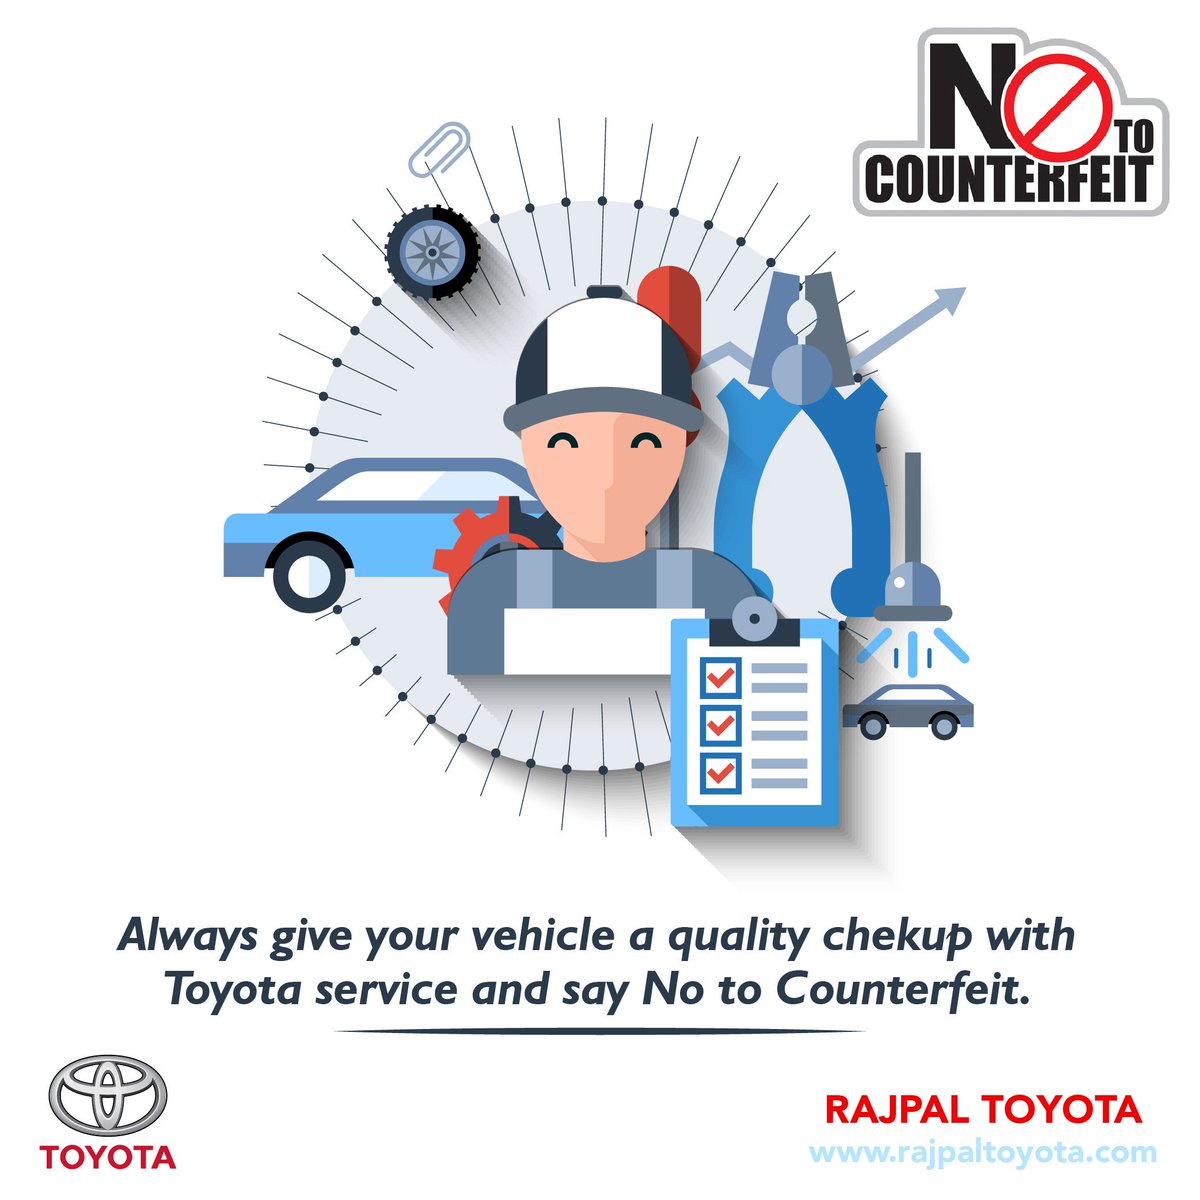 Genuine Parts and Quality Service is what we serve for in Rajpal Toyota. 

#RajpalToyota #Toyota #Bhopal #RajpalToyotaBhopal #ToyotaIndia #GenuineParts #SayNoToCounterfeit #NoToCounterfeit #HappyCustomers #CarsOfIndia #ToyotaCars